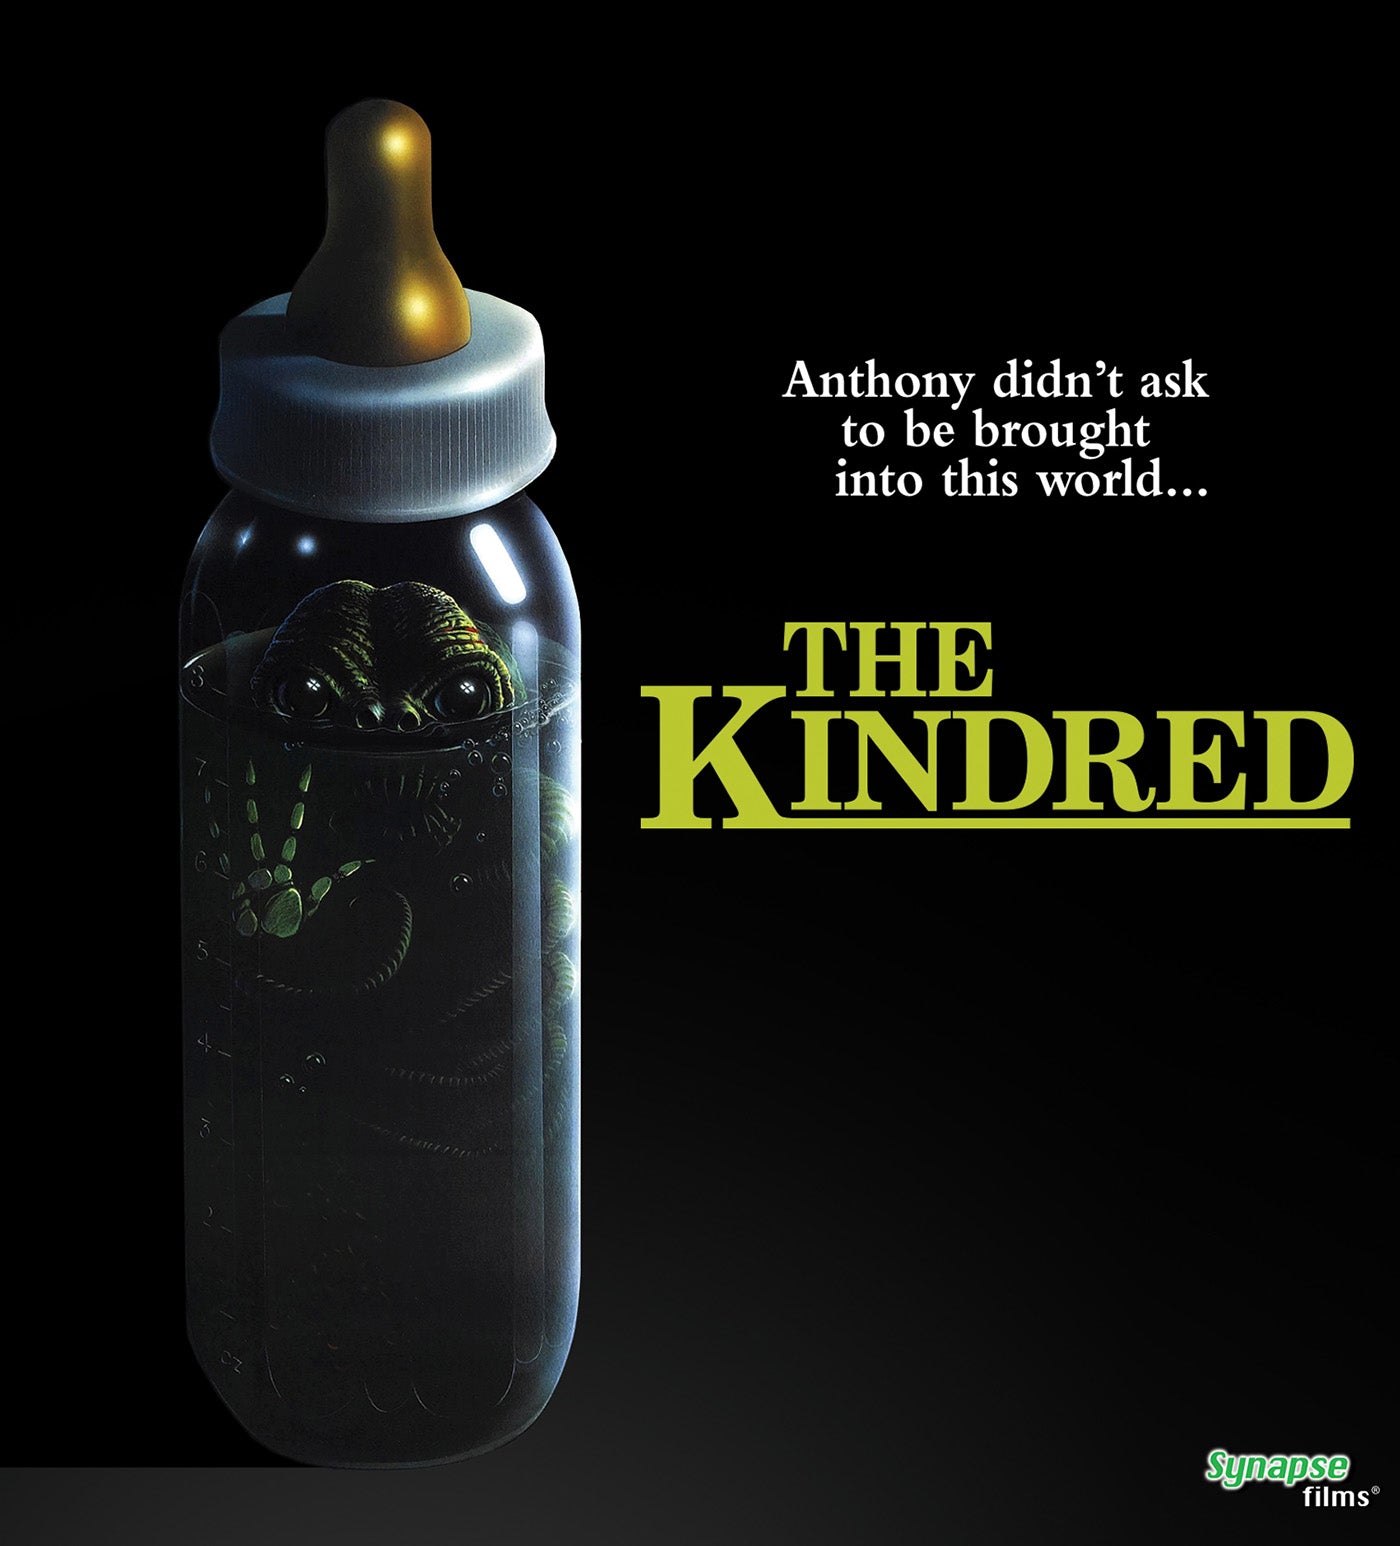 THE KINDRED BLU-RAY